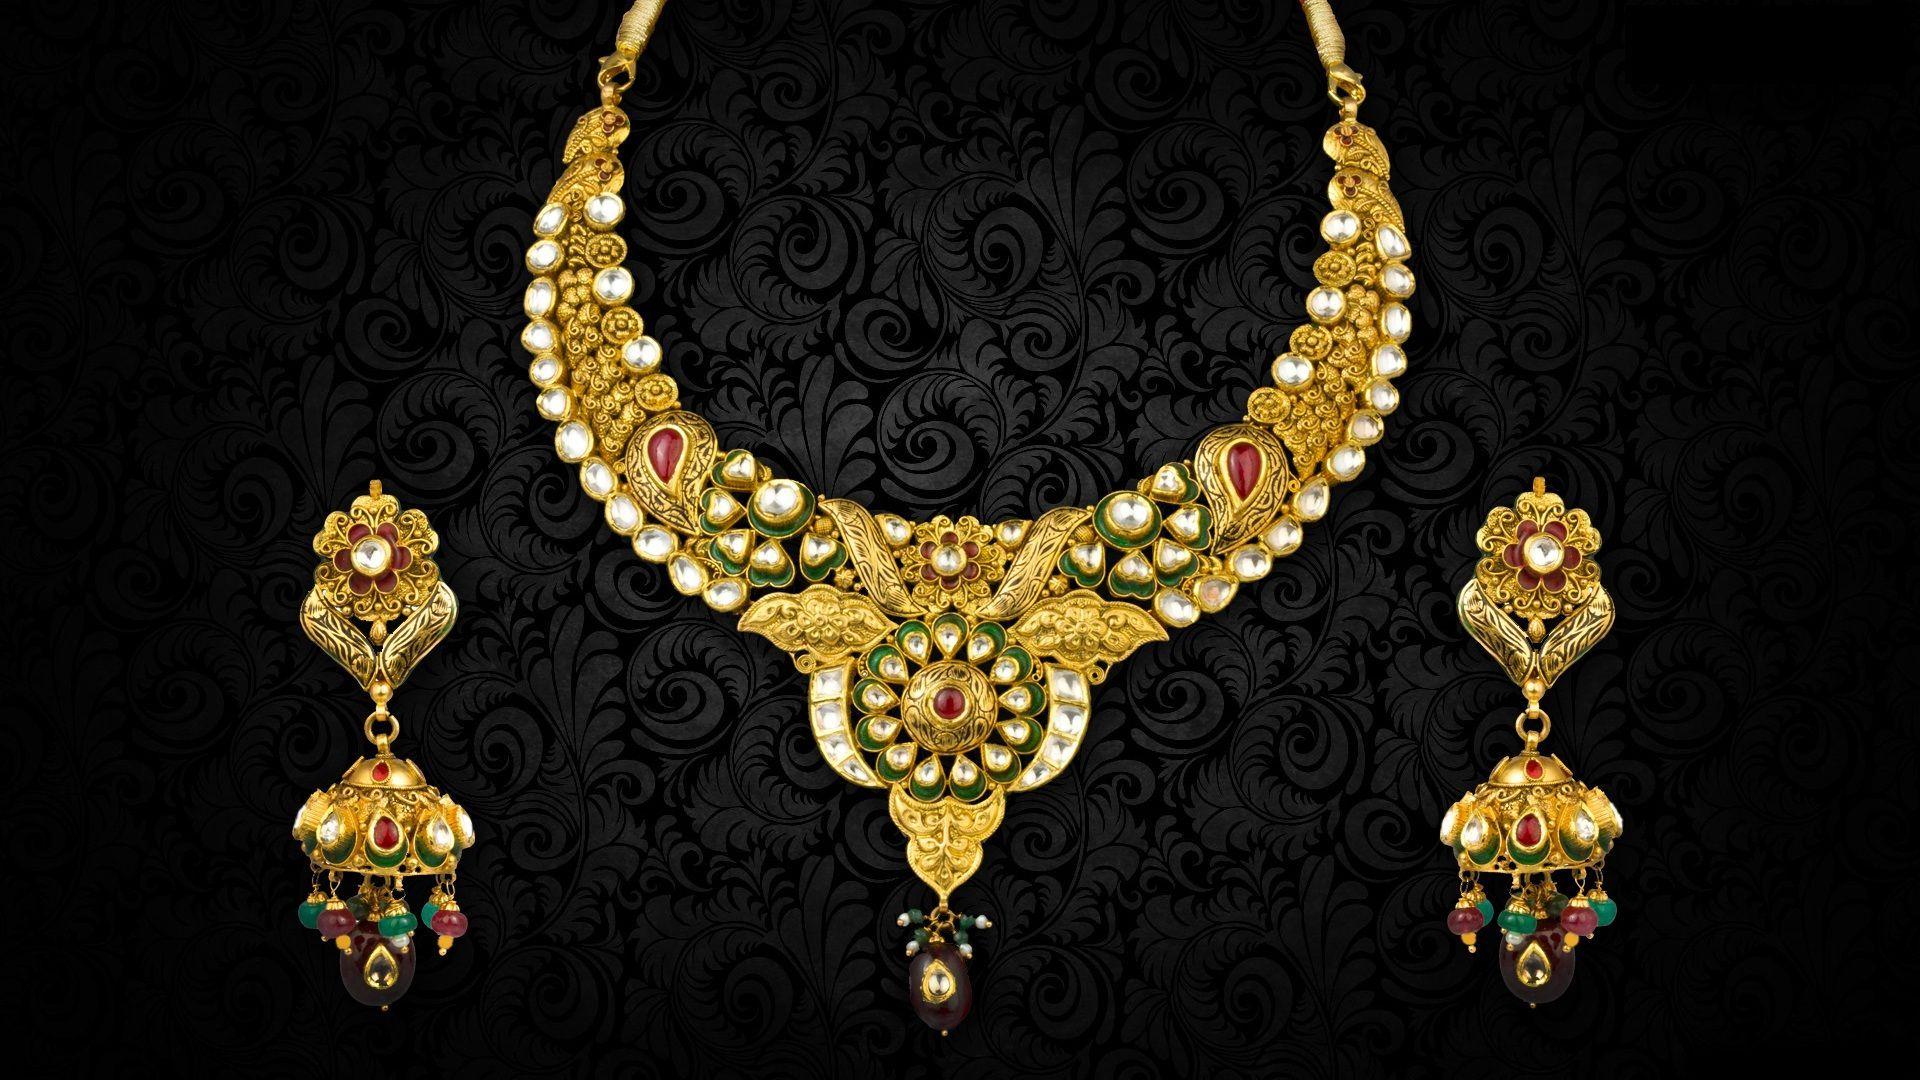 Gold Jewellery Wallpapers - Top Free Gold Jewellery Backgrounds